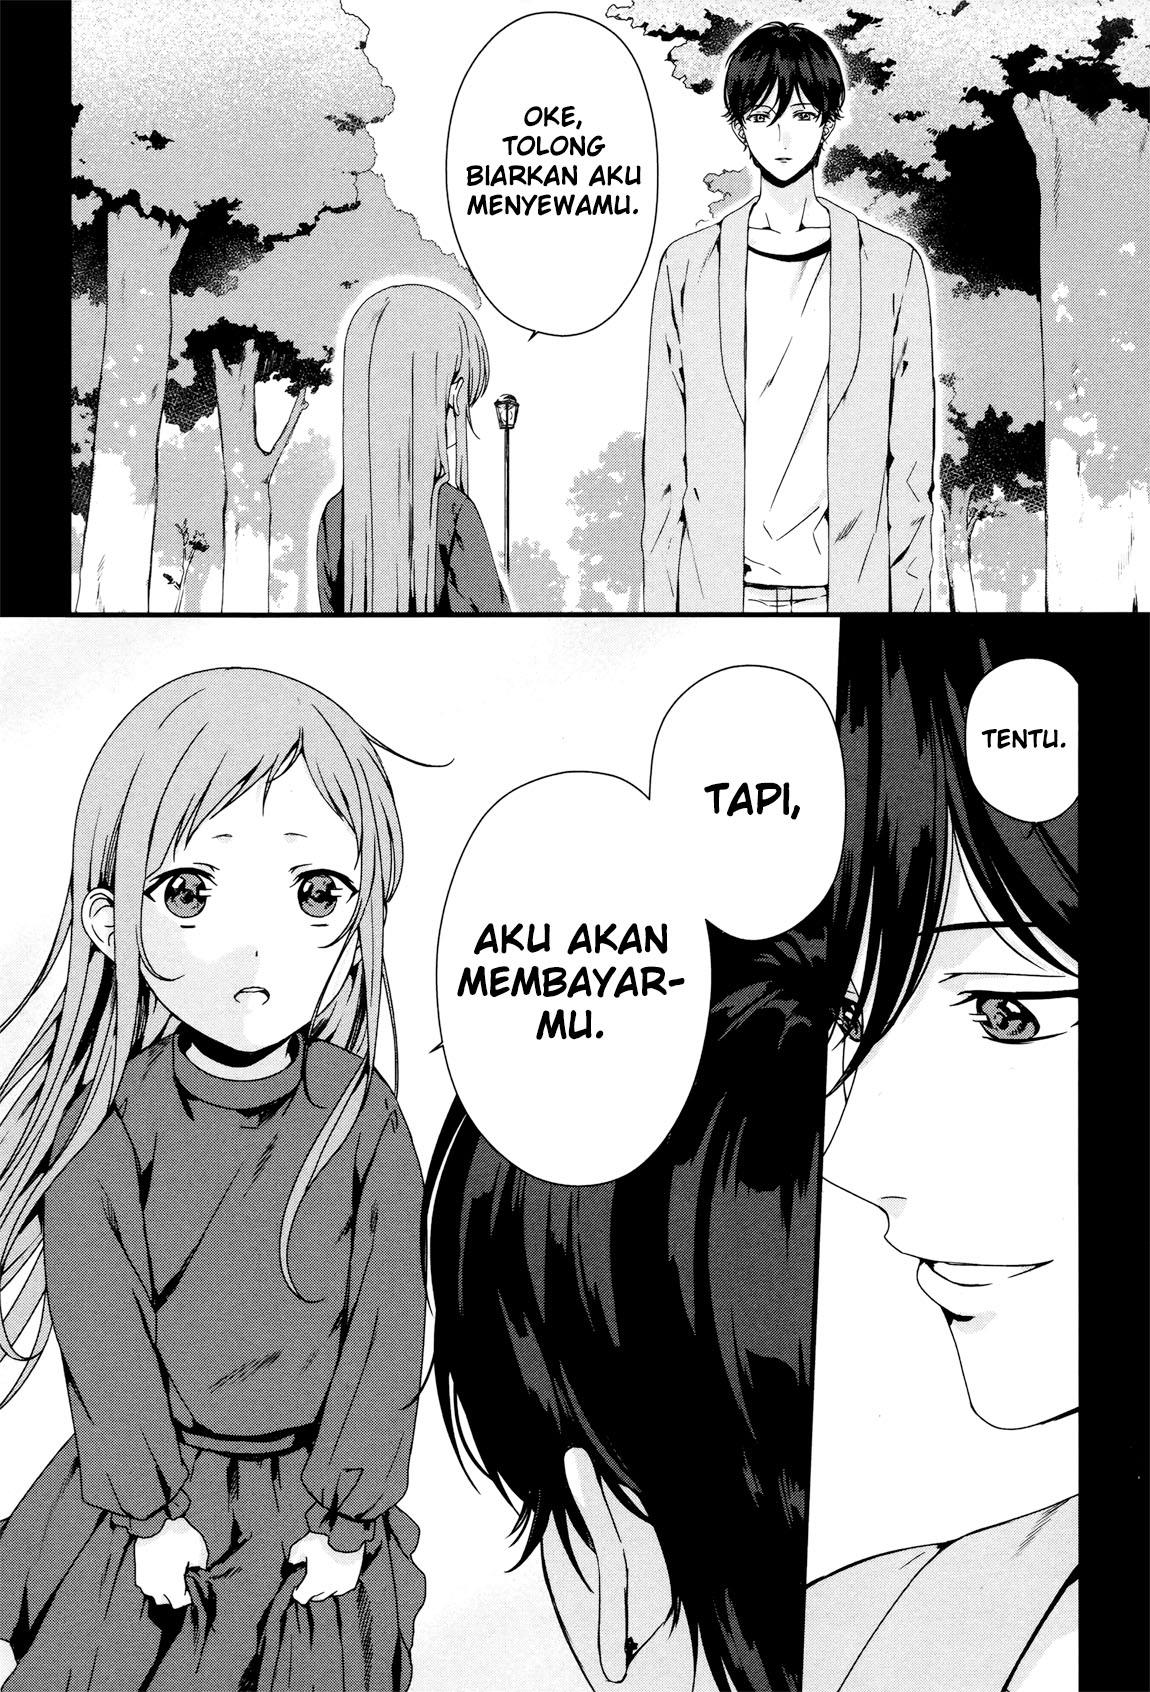 Rental Onii-chan Chapter 3